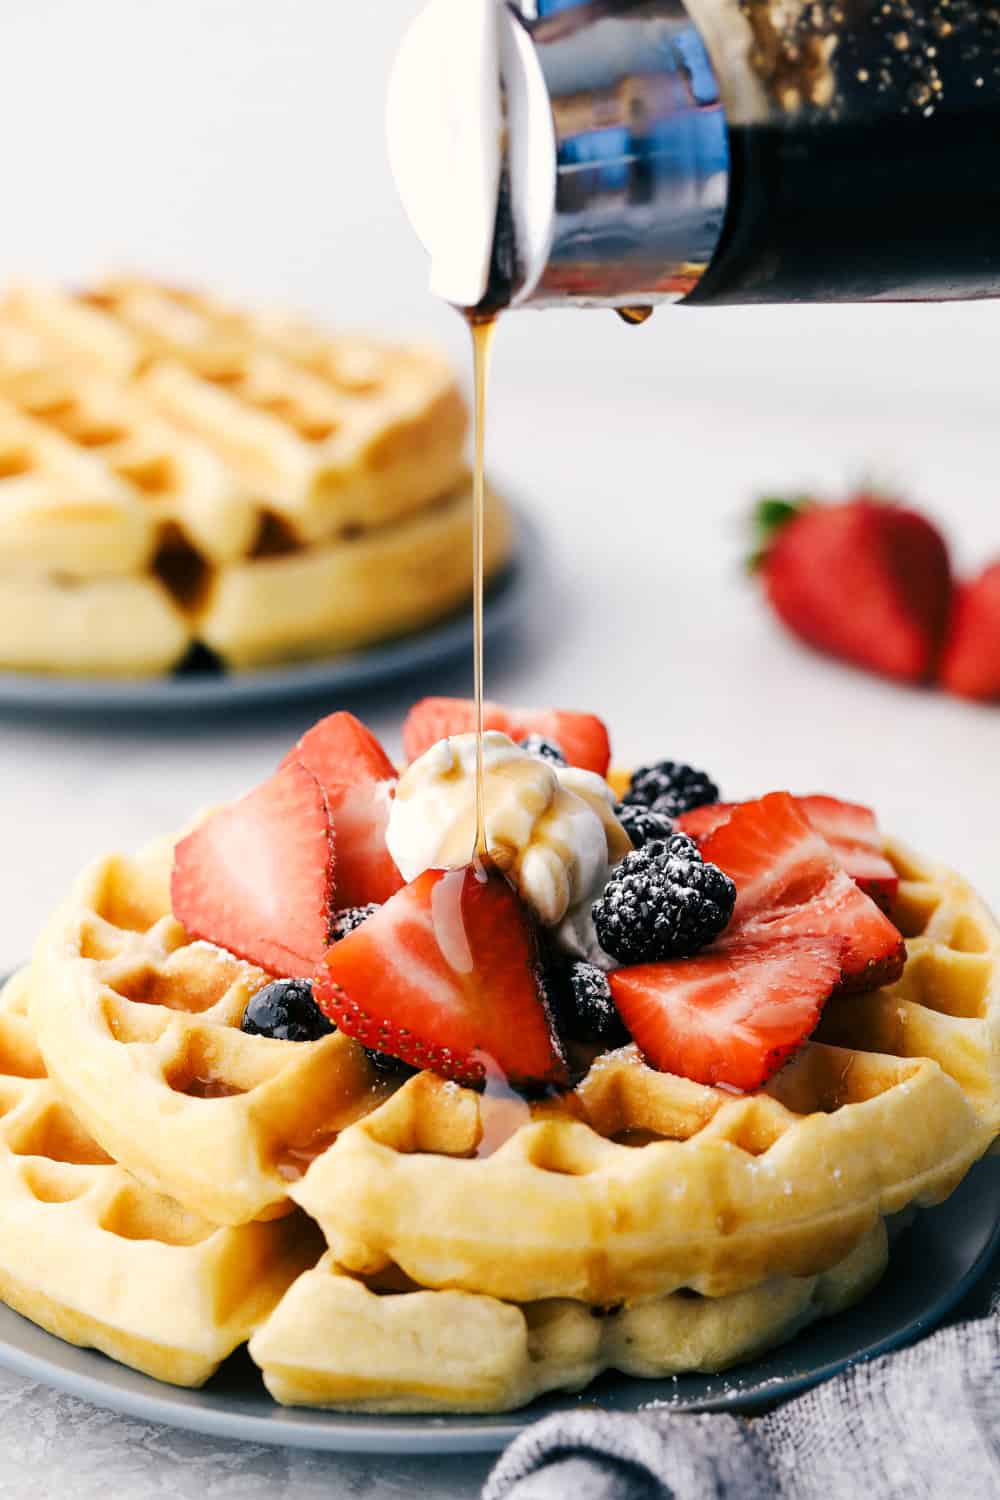 Pouring syrup over waffles with fruit and whipped cream. 